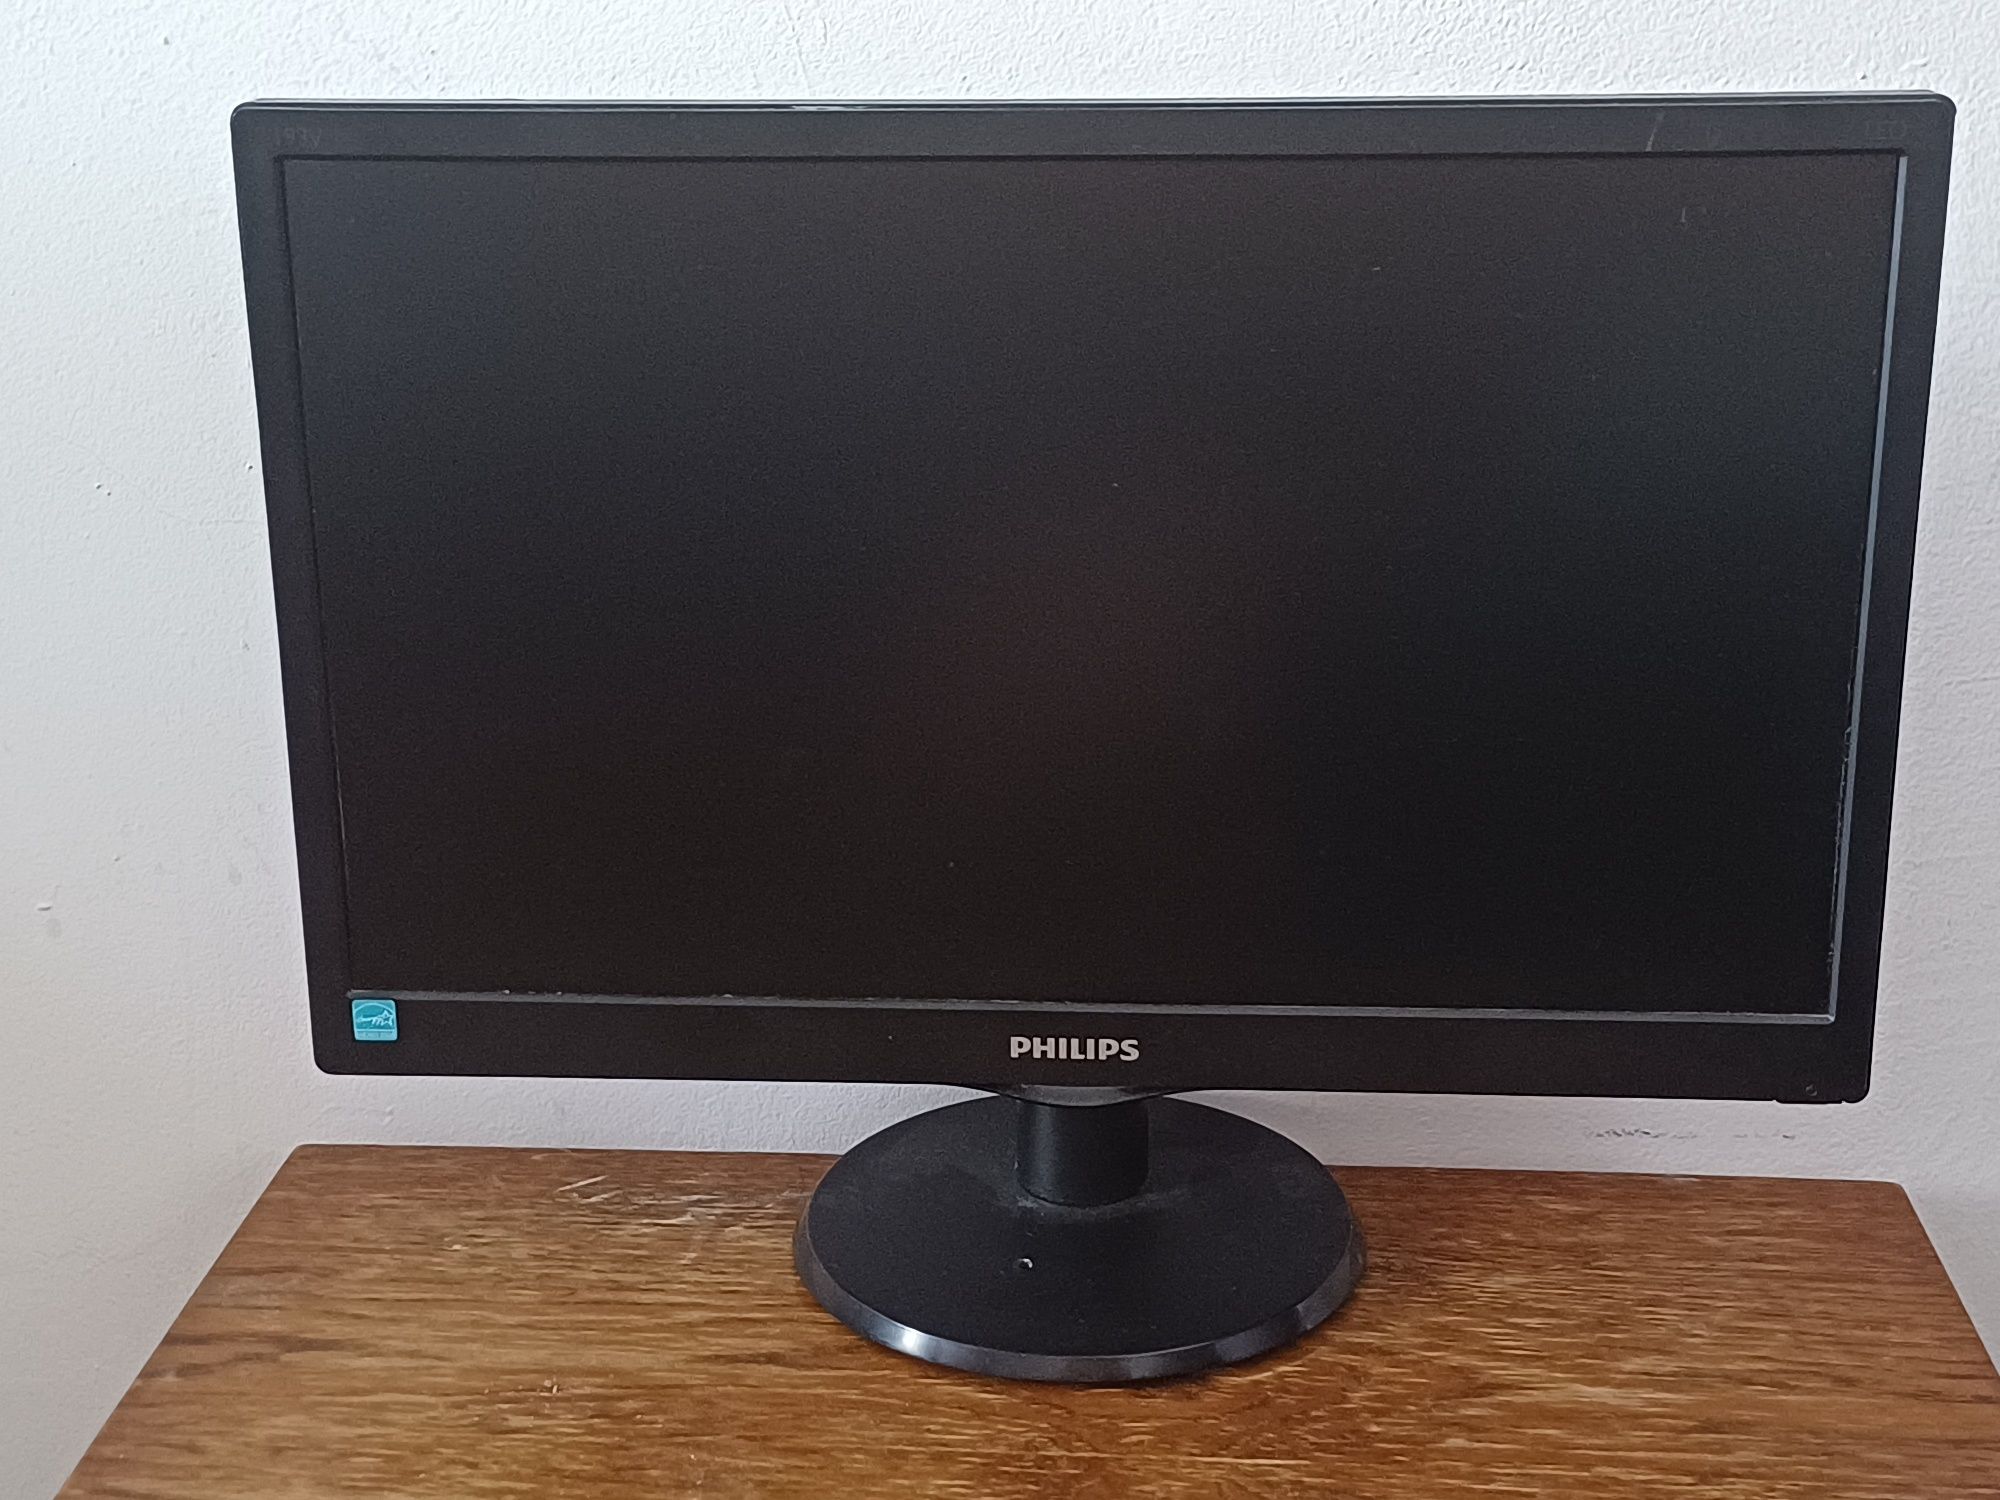 Vand Monitor Philips Impecabil